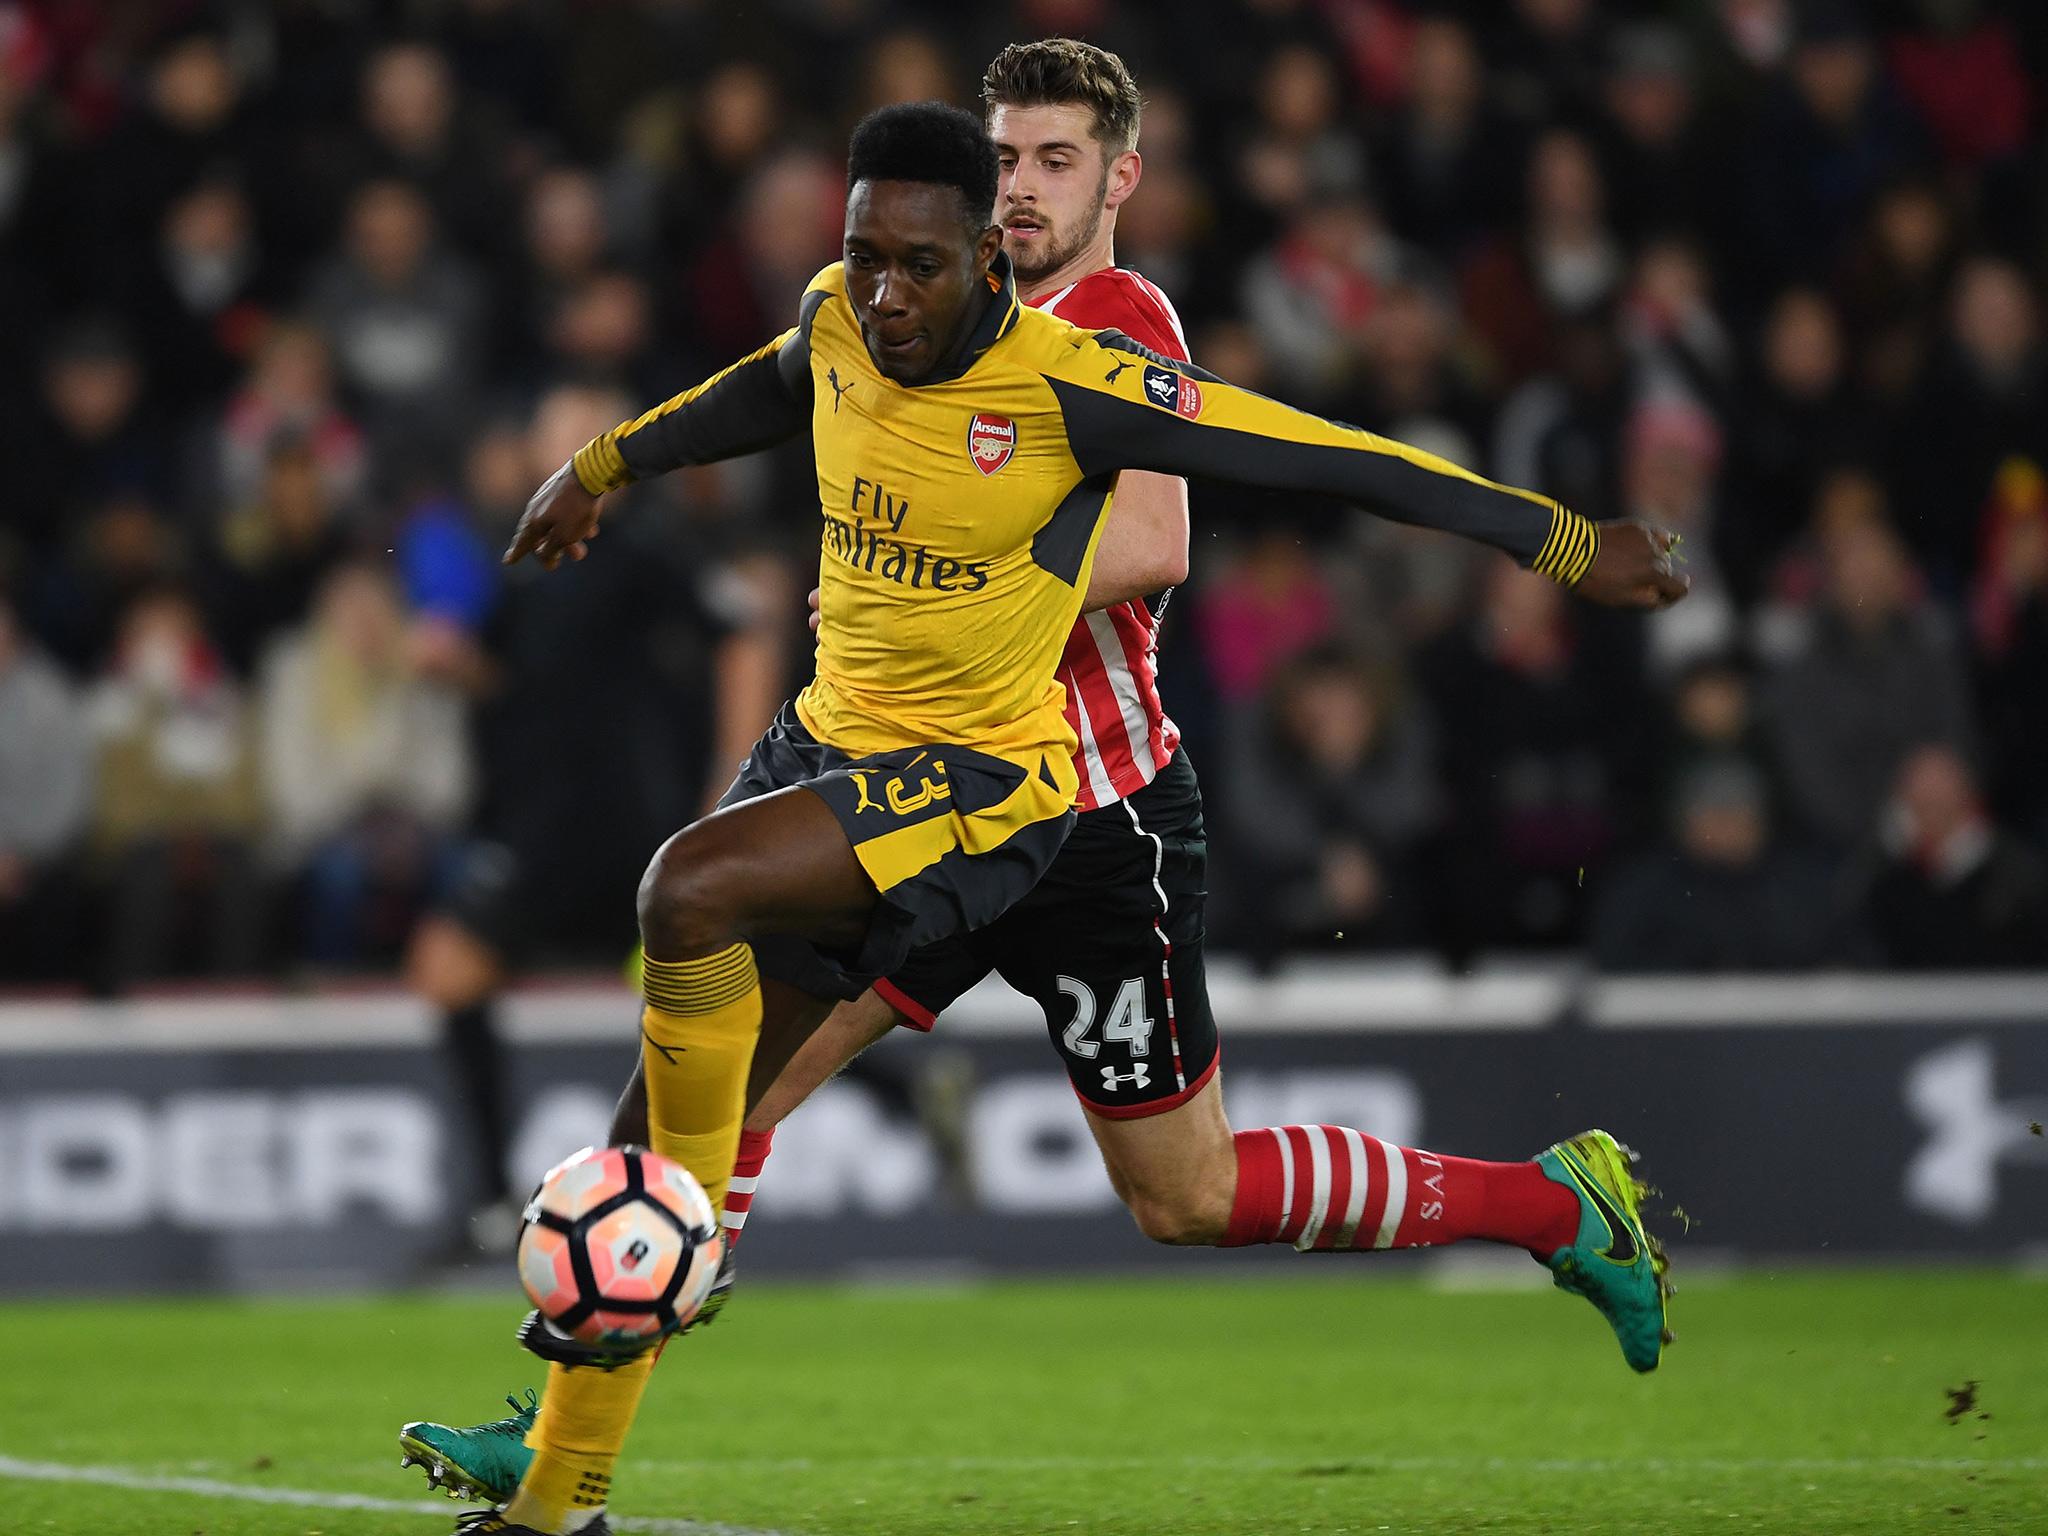 Welbeck shone in Arsenal's win over Southampton